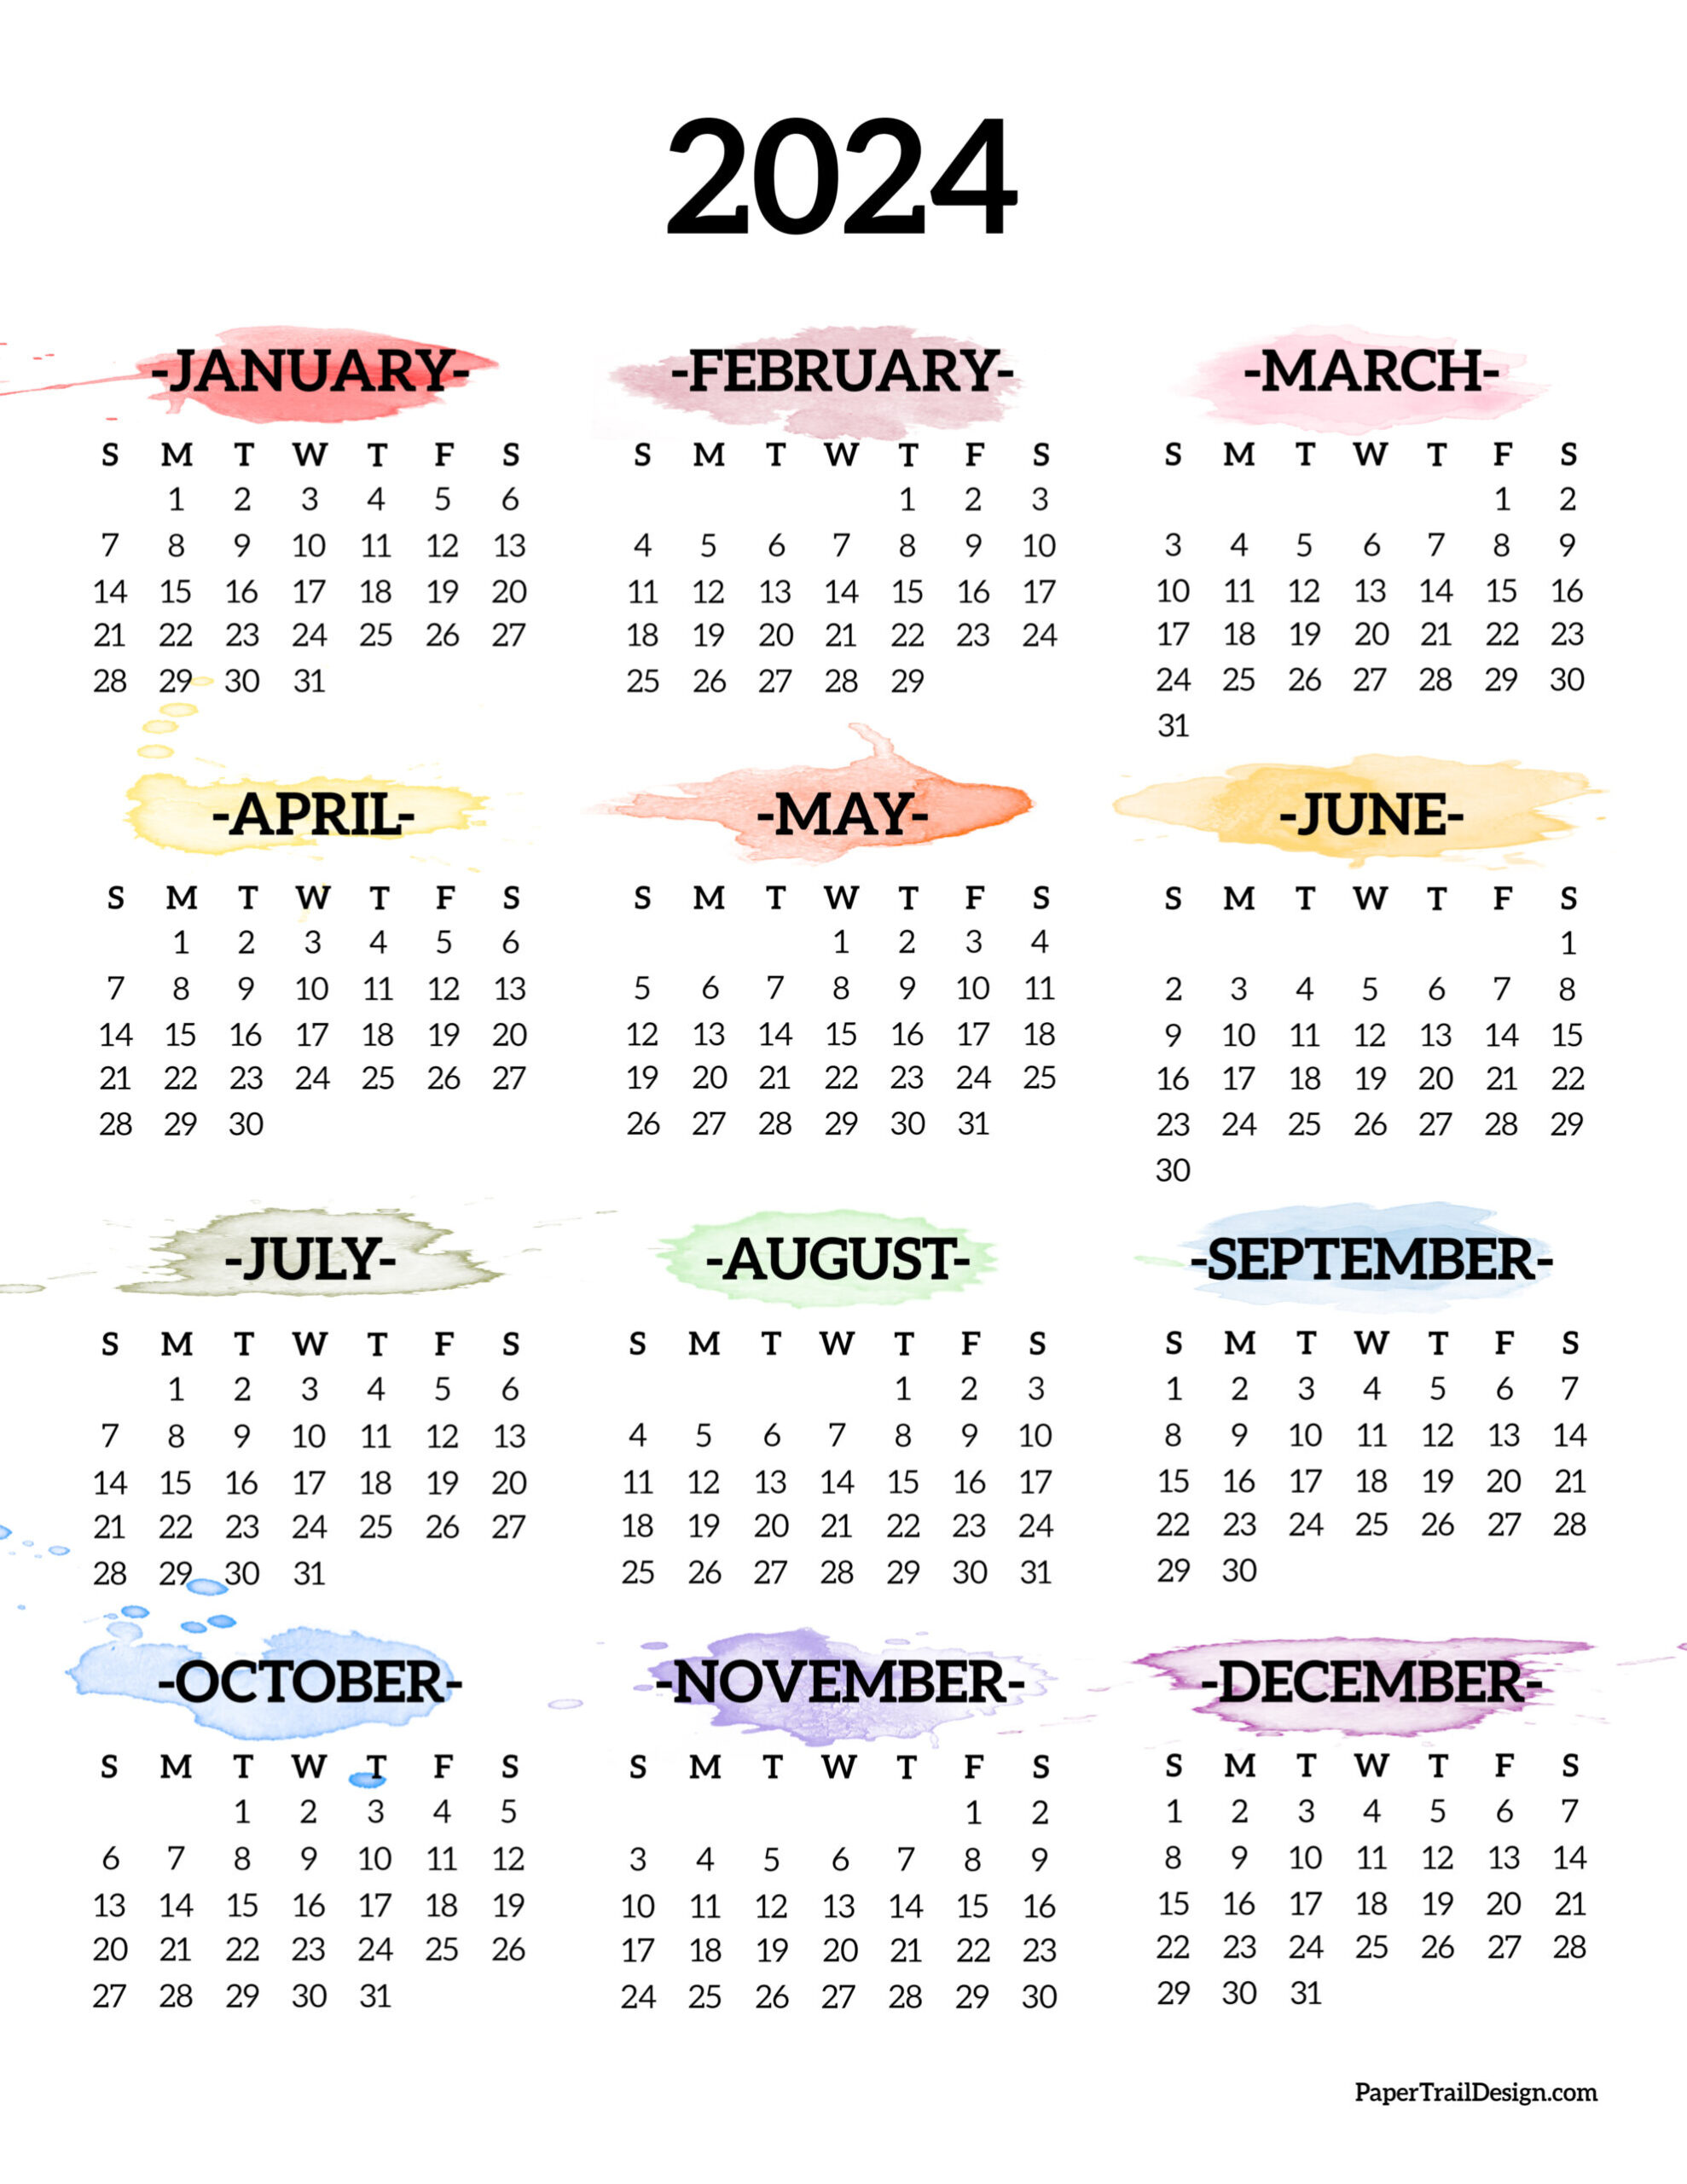 Calendar 2024 Printable One Page - Paper Trail Design | 2024 Yearly Calendar At A Glance